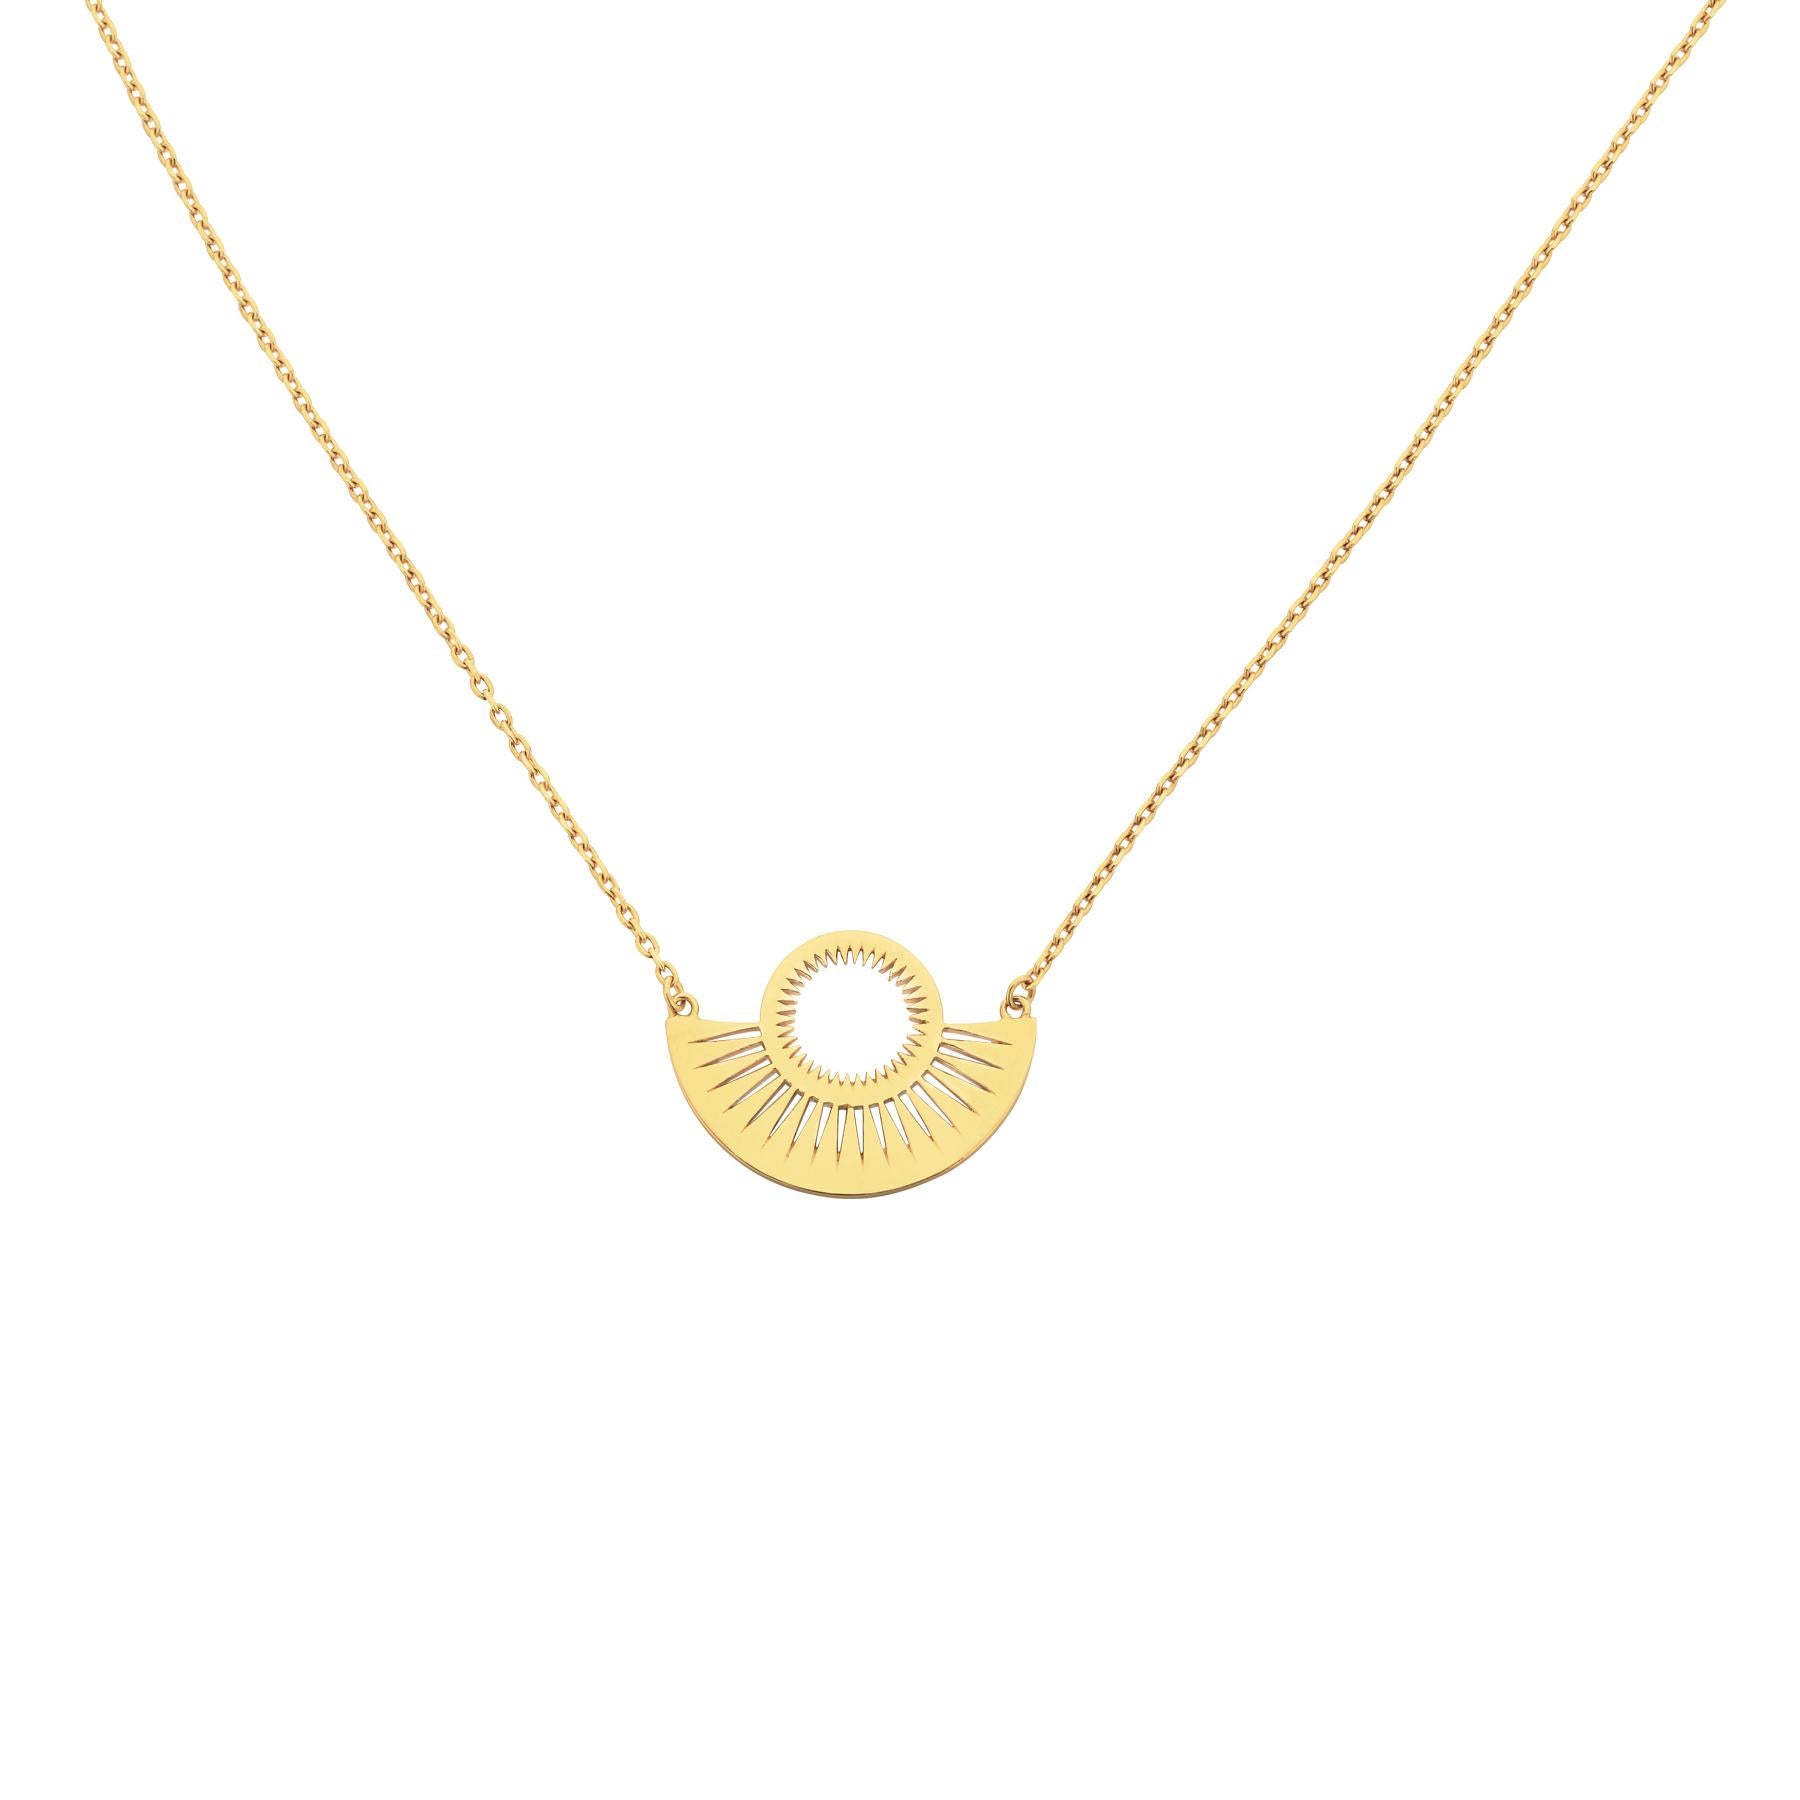 Zoe and Morgan Gold Pocket Full of Sunshine Necklace For Sale